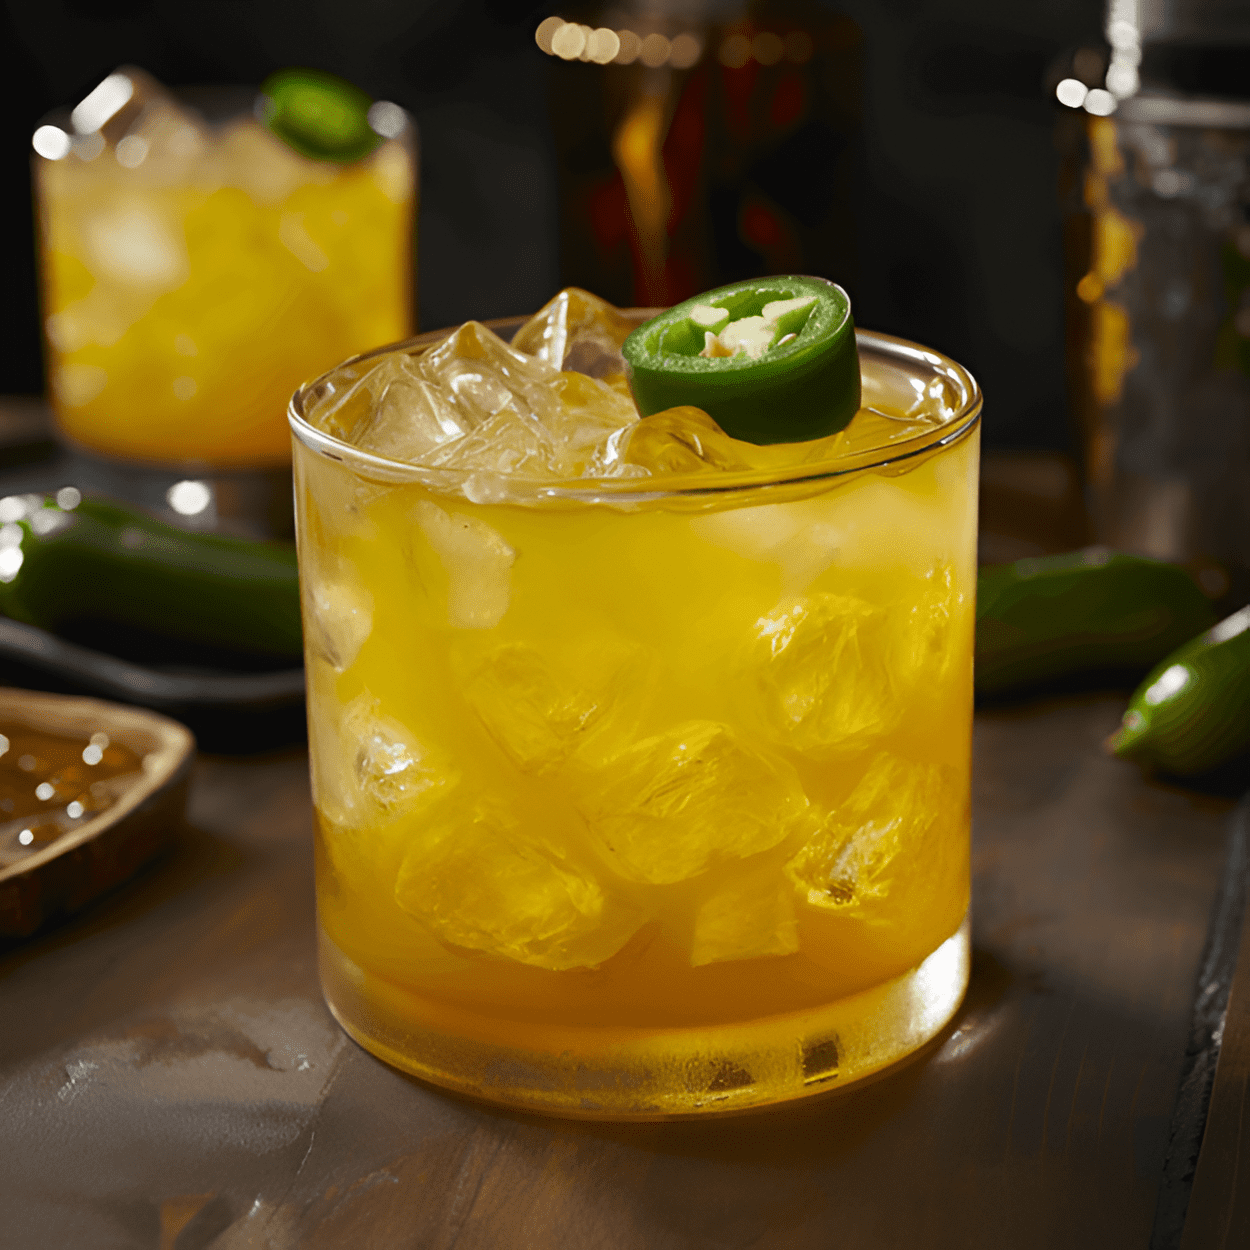 Bee Sting Cocktail Recipe - The Bee Sting cocktail is a delightful blend of sweet, sour, and spicy. The honey syrup provides a smooth sweetness, the lemon juice adds a refreshing tang, and the jalapeno gives it a surprising kick. It's a full-bodied cocktail with a complex flavor profile.